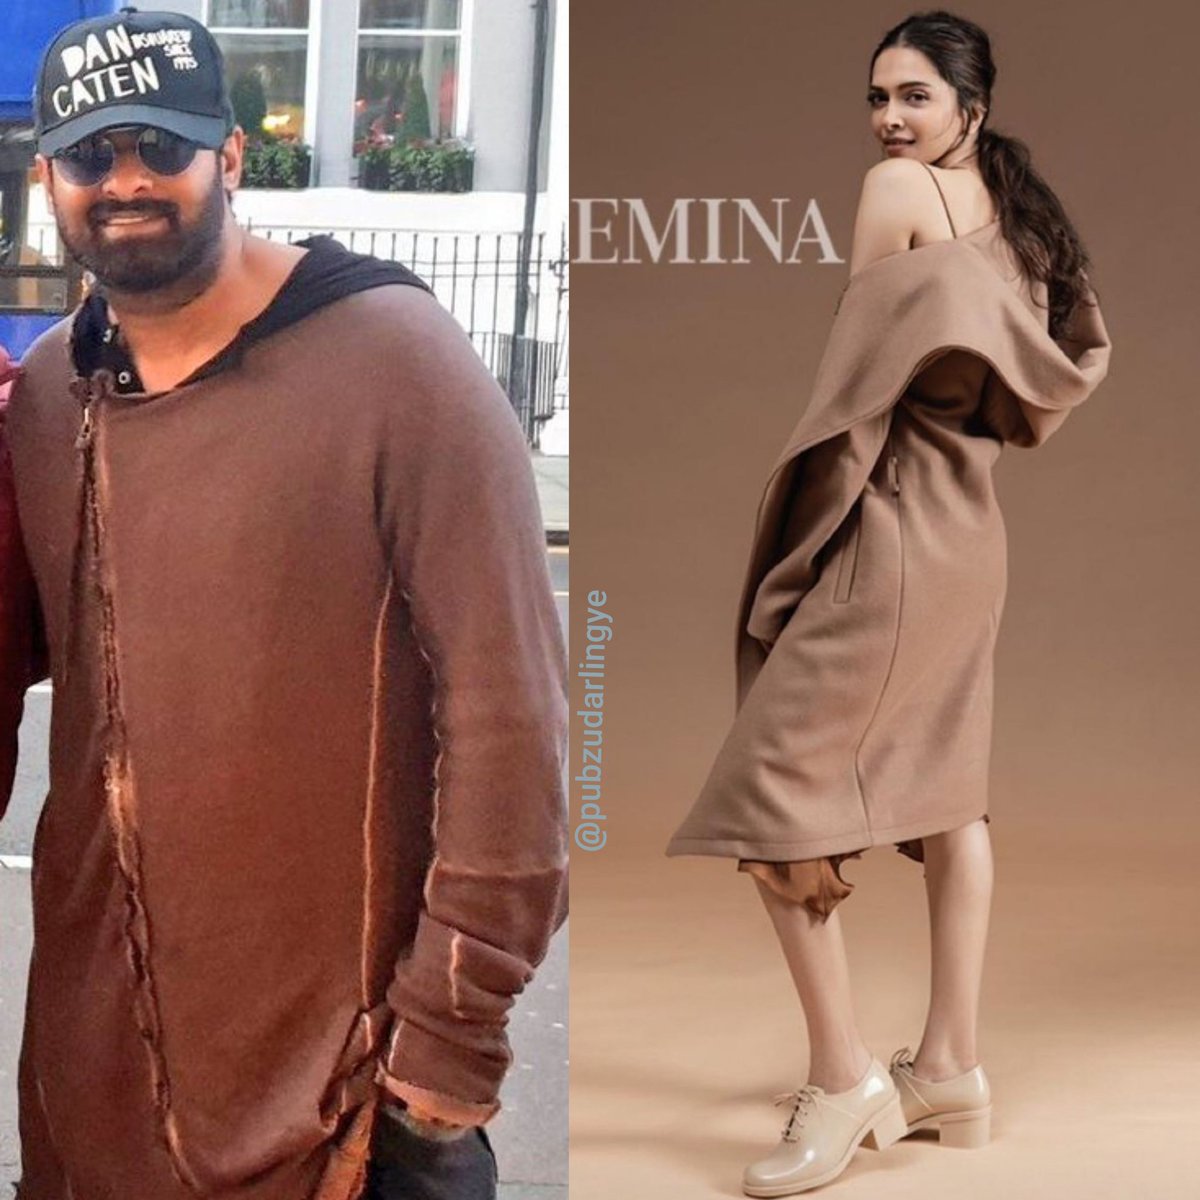 Chocolate brown long uppers, striped dress, the way they sit & above all killing in red  #Prabhas.  #DeepikaPrabhas  @deepikapadukone  #Prabhas21.